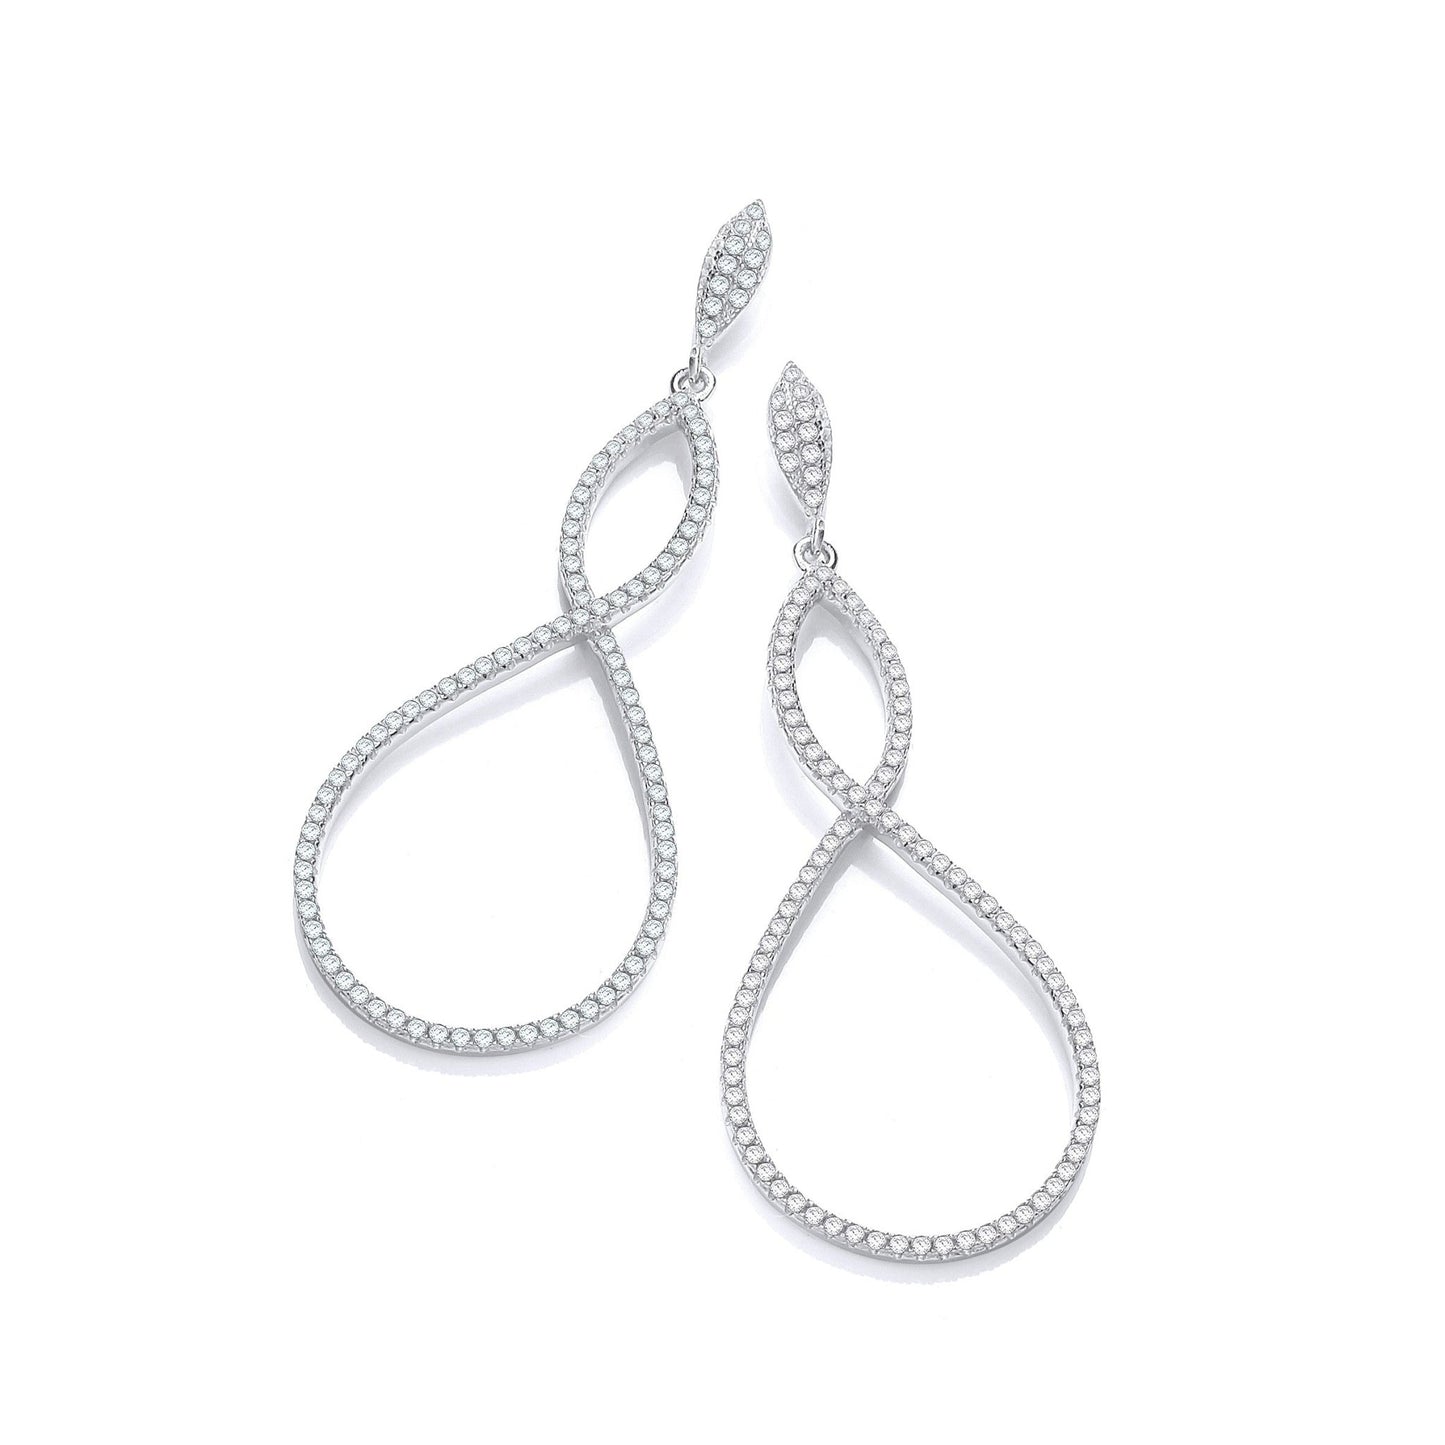 Drop 925 Sterling Silver Infinity Earrings Set With CZs - FJewellery